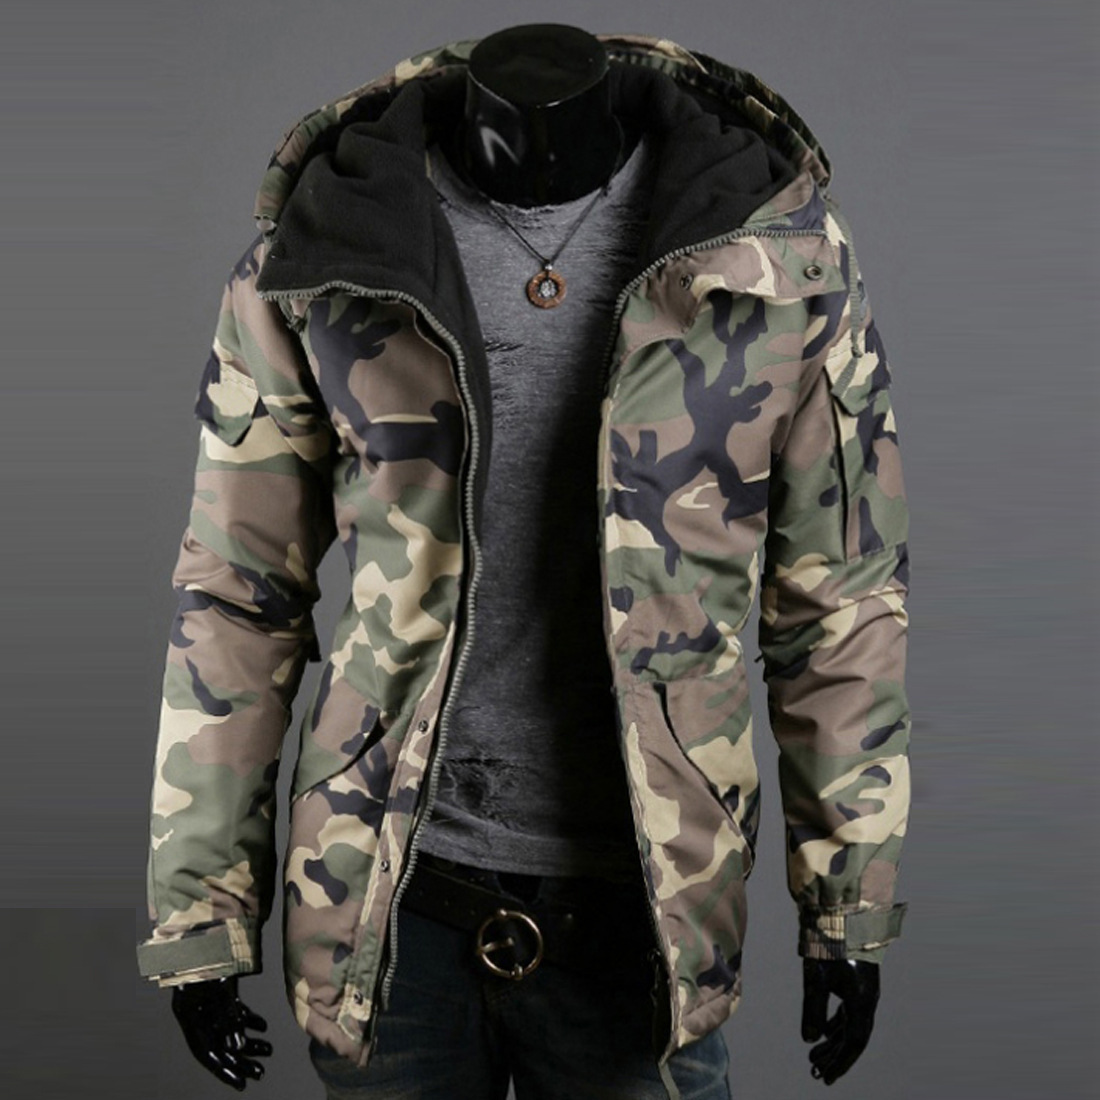 Camouflage men's casual hooded jacket